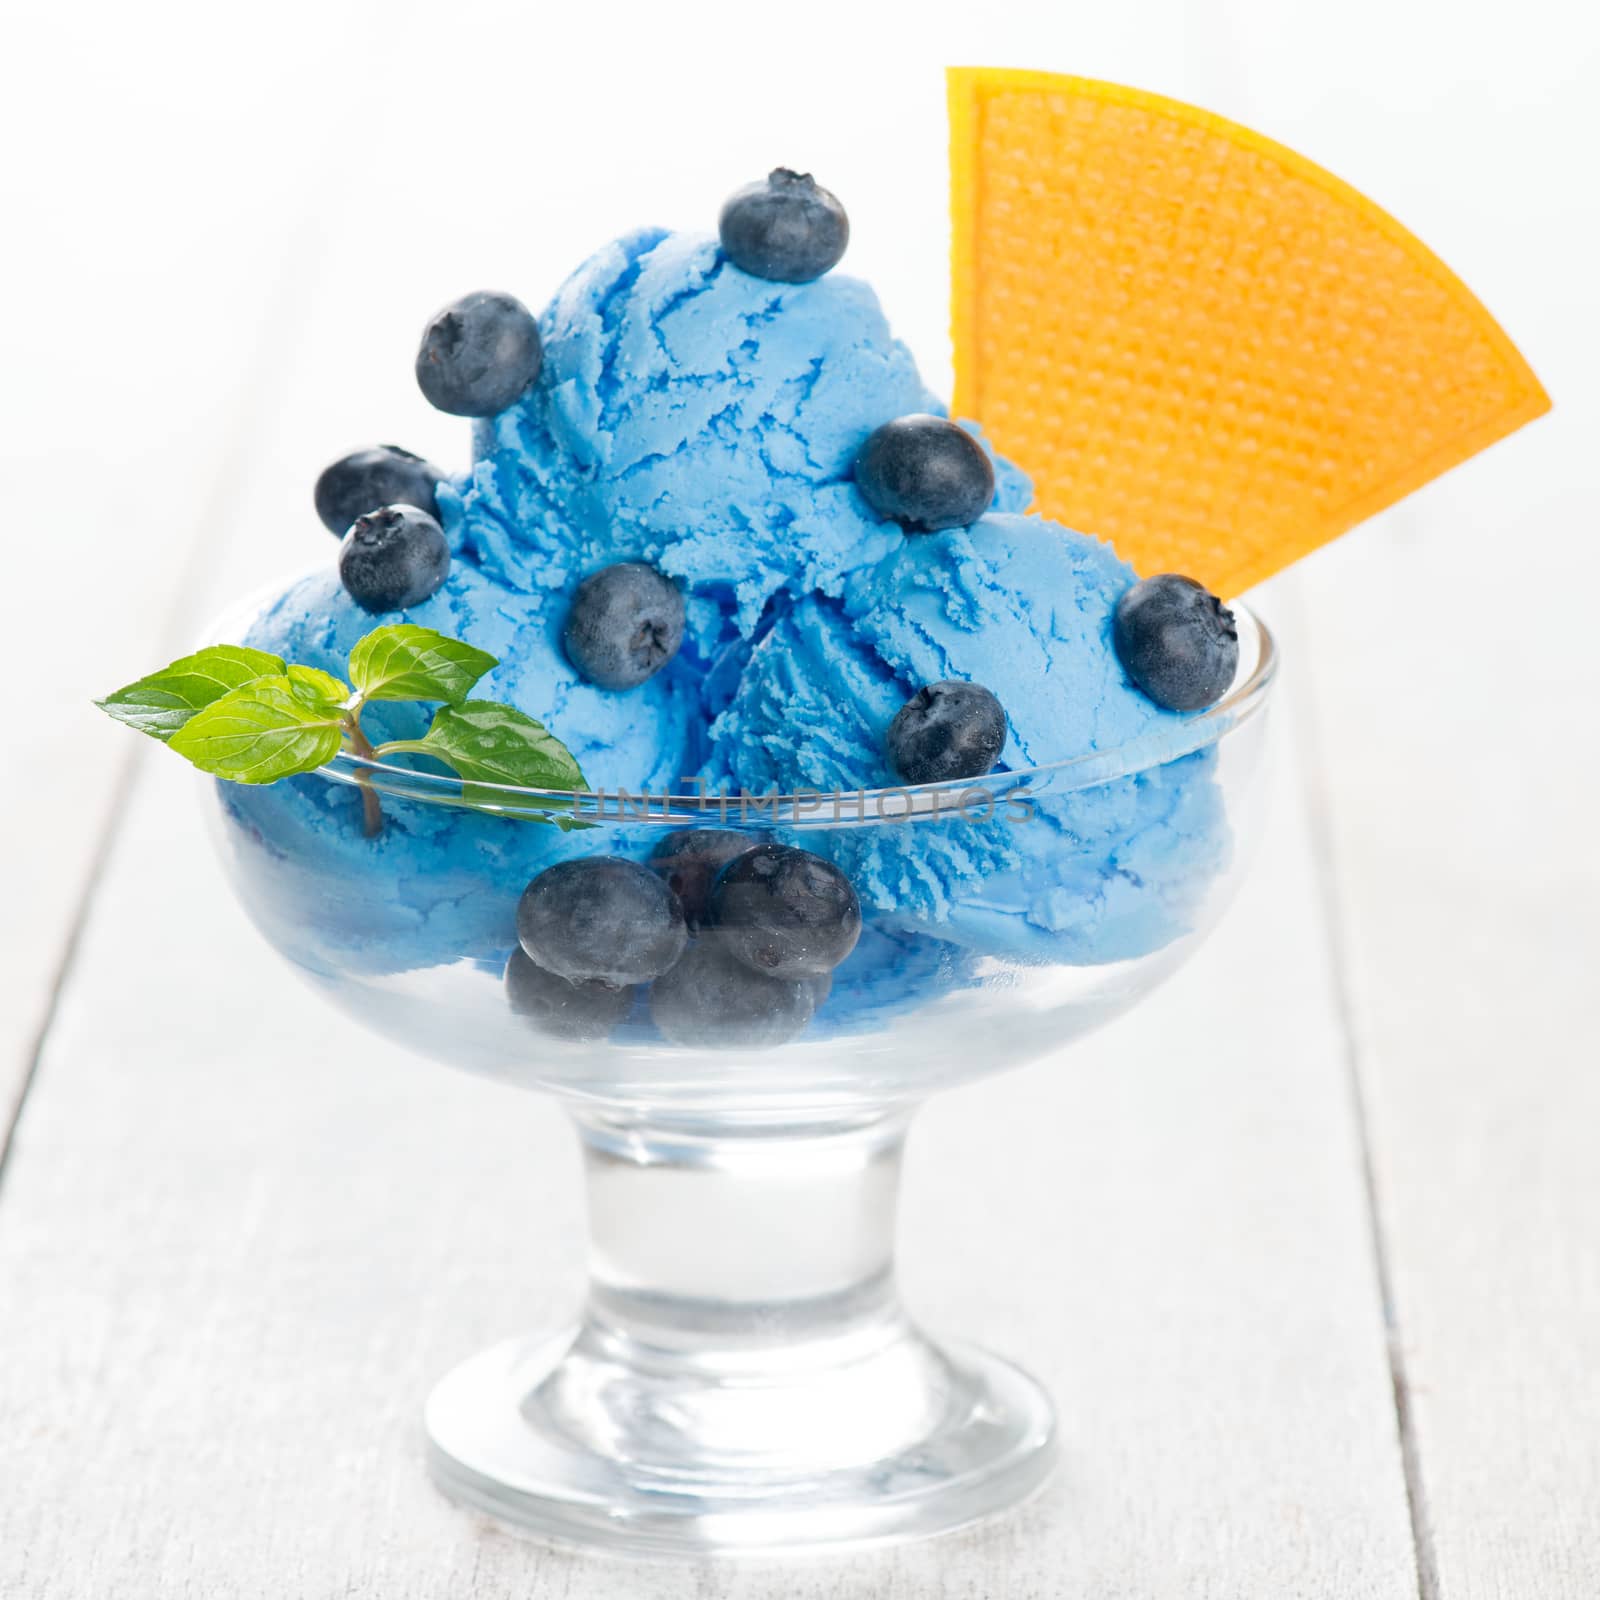 Blueberry ice cream in cup by szefei